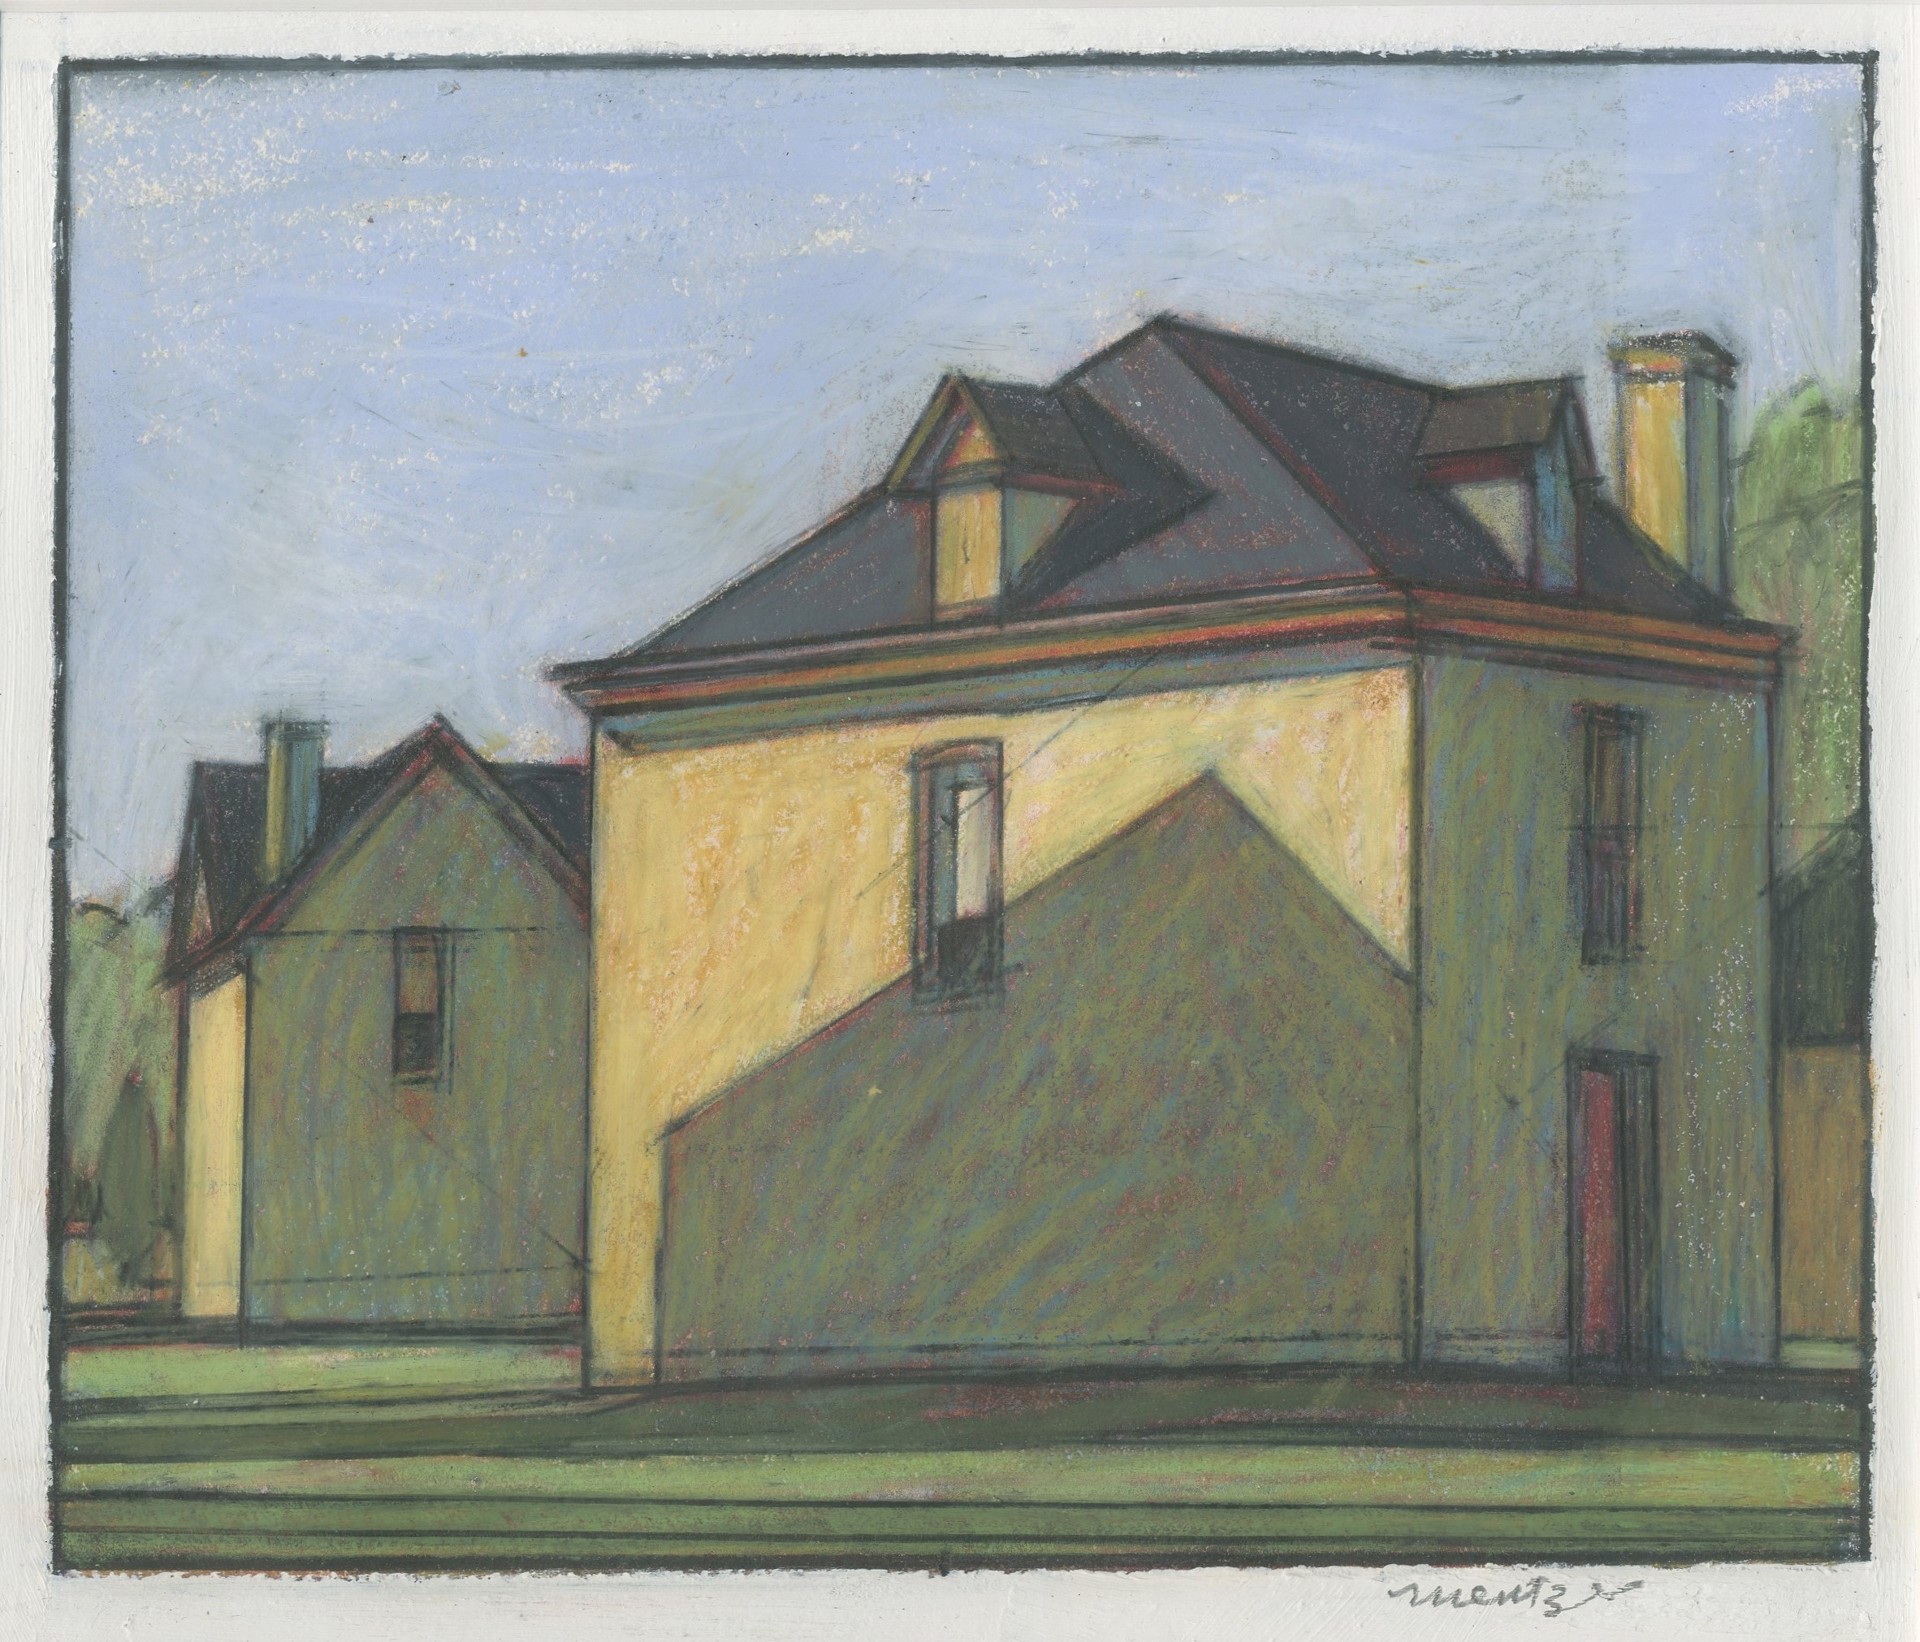 Two Houses Study 2 by Mark Mentzer